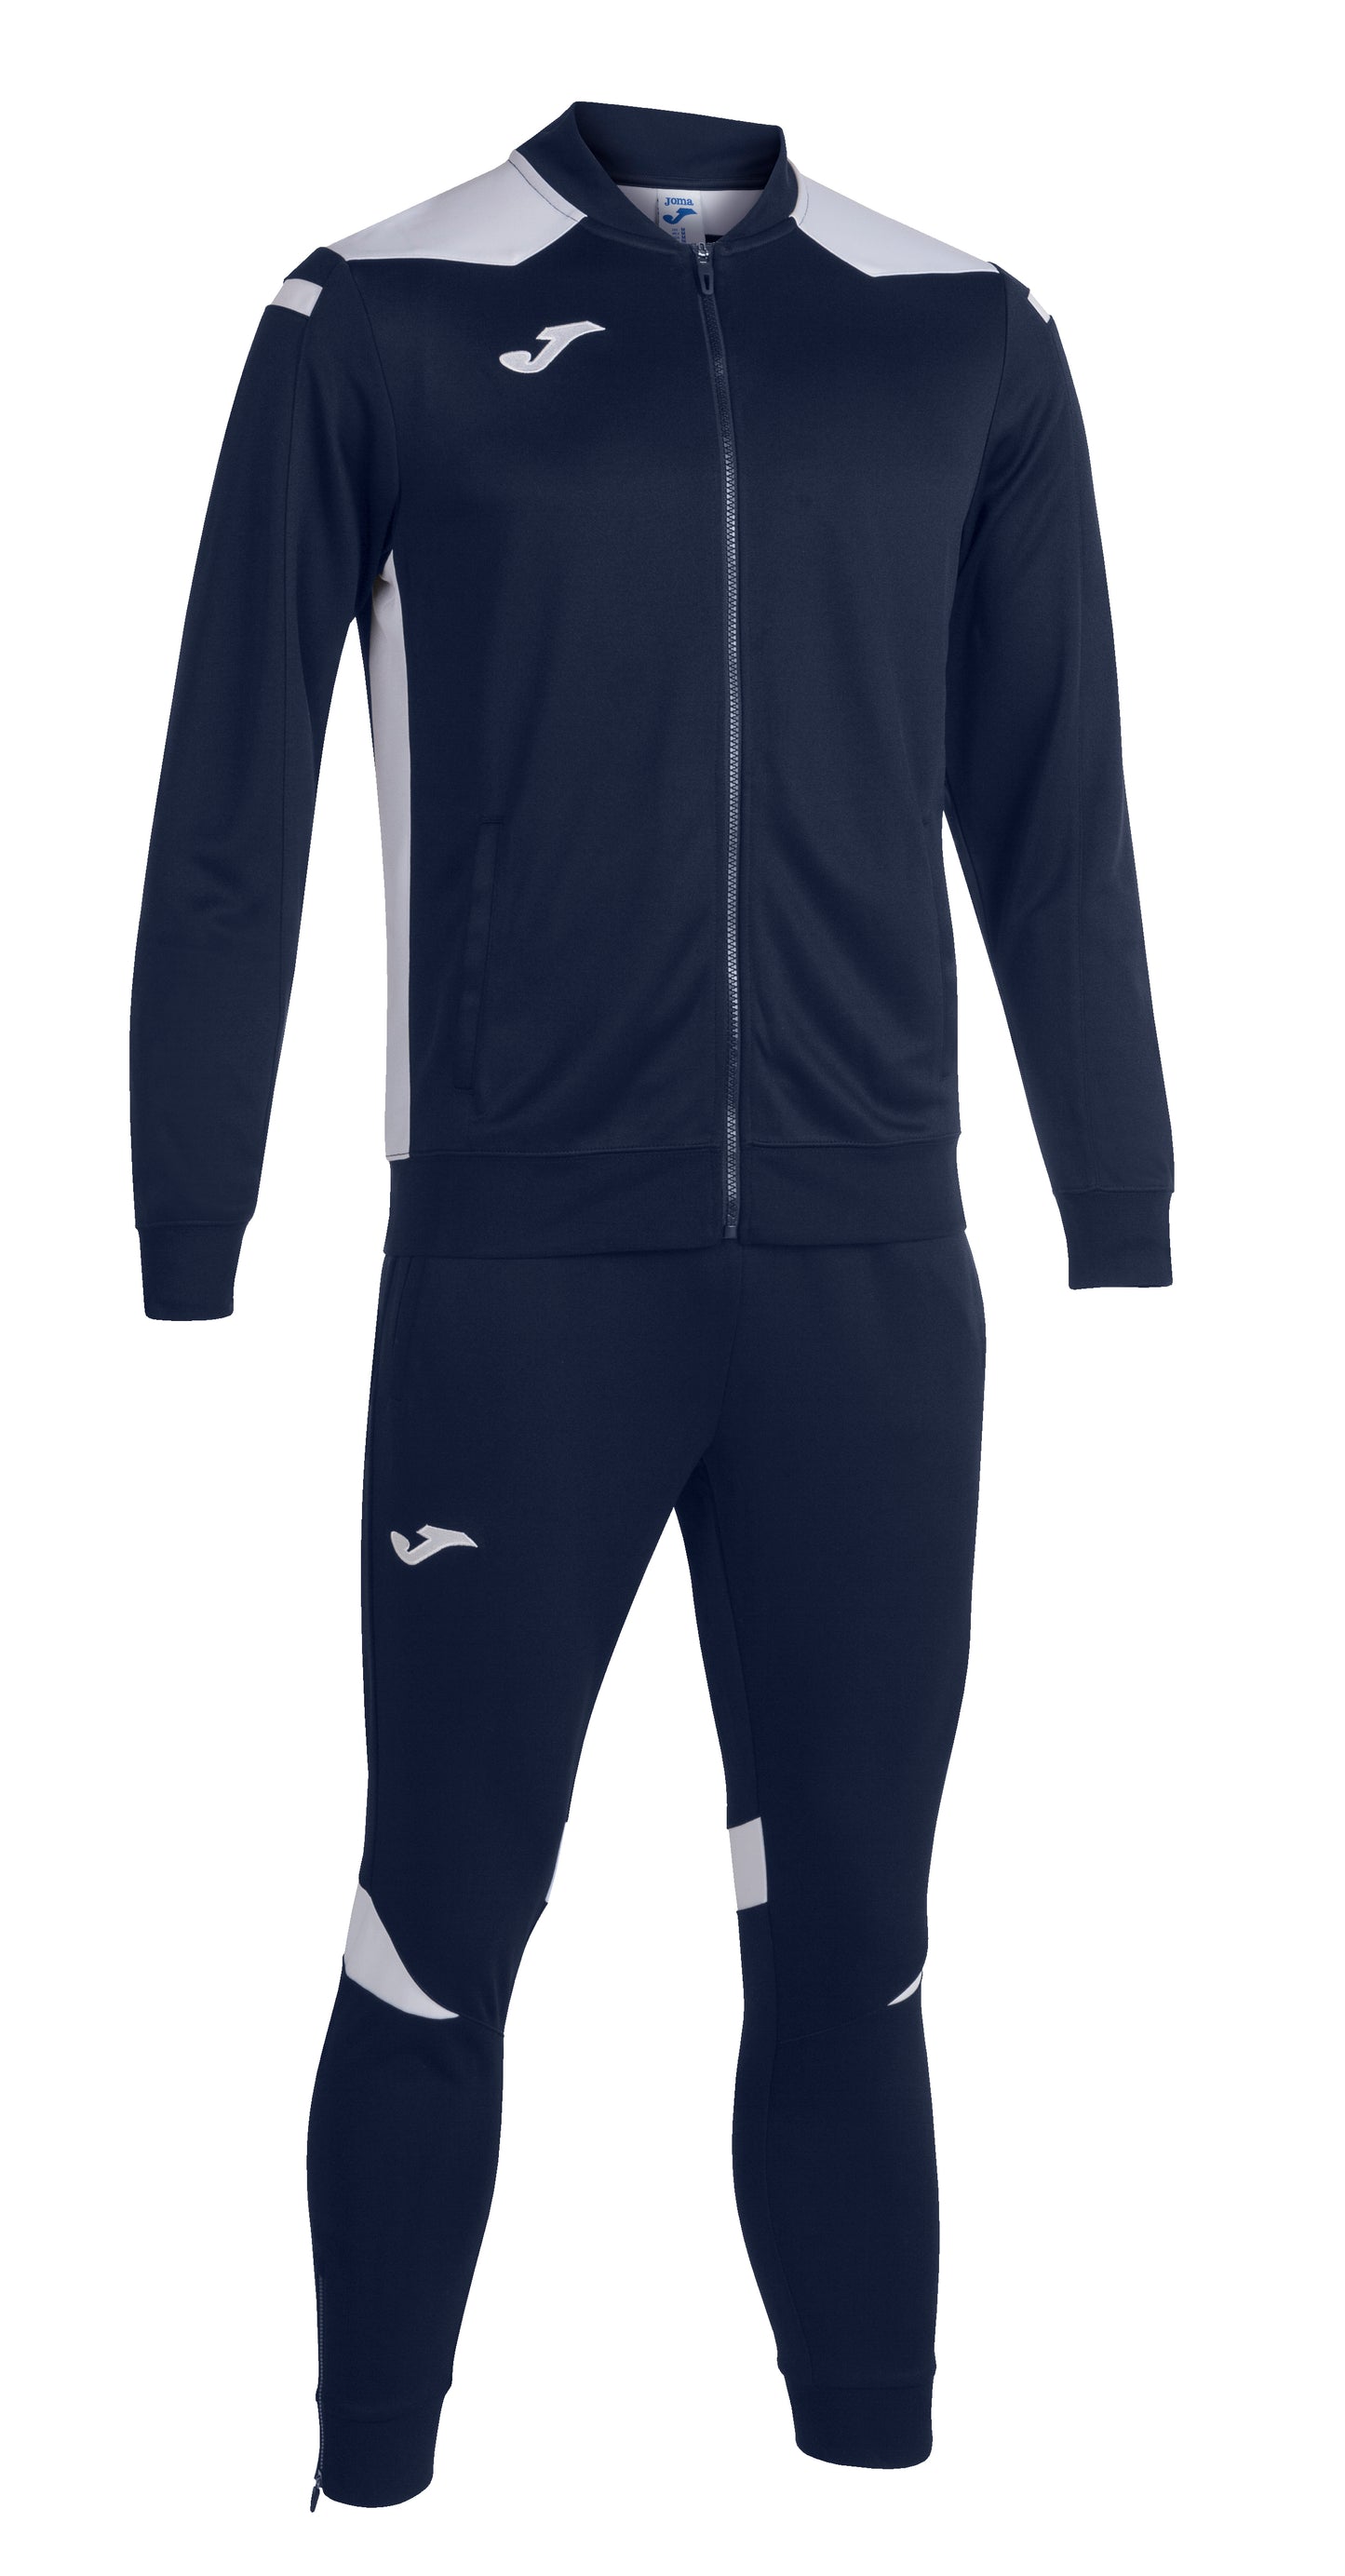 Joma Sport Tracksuit available in Joma Canada Store. Customize your teamwear with sponsors and numbers. Joma is shipping in Canada.